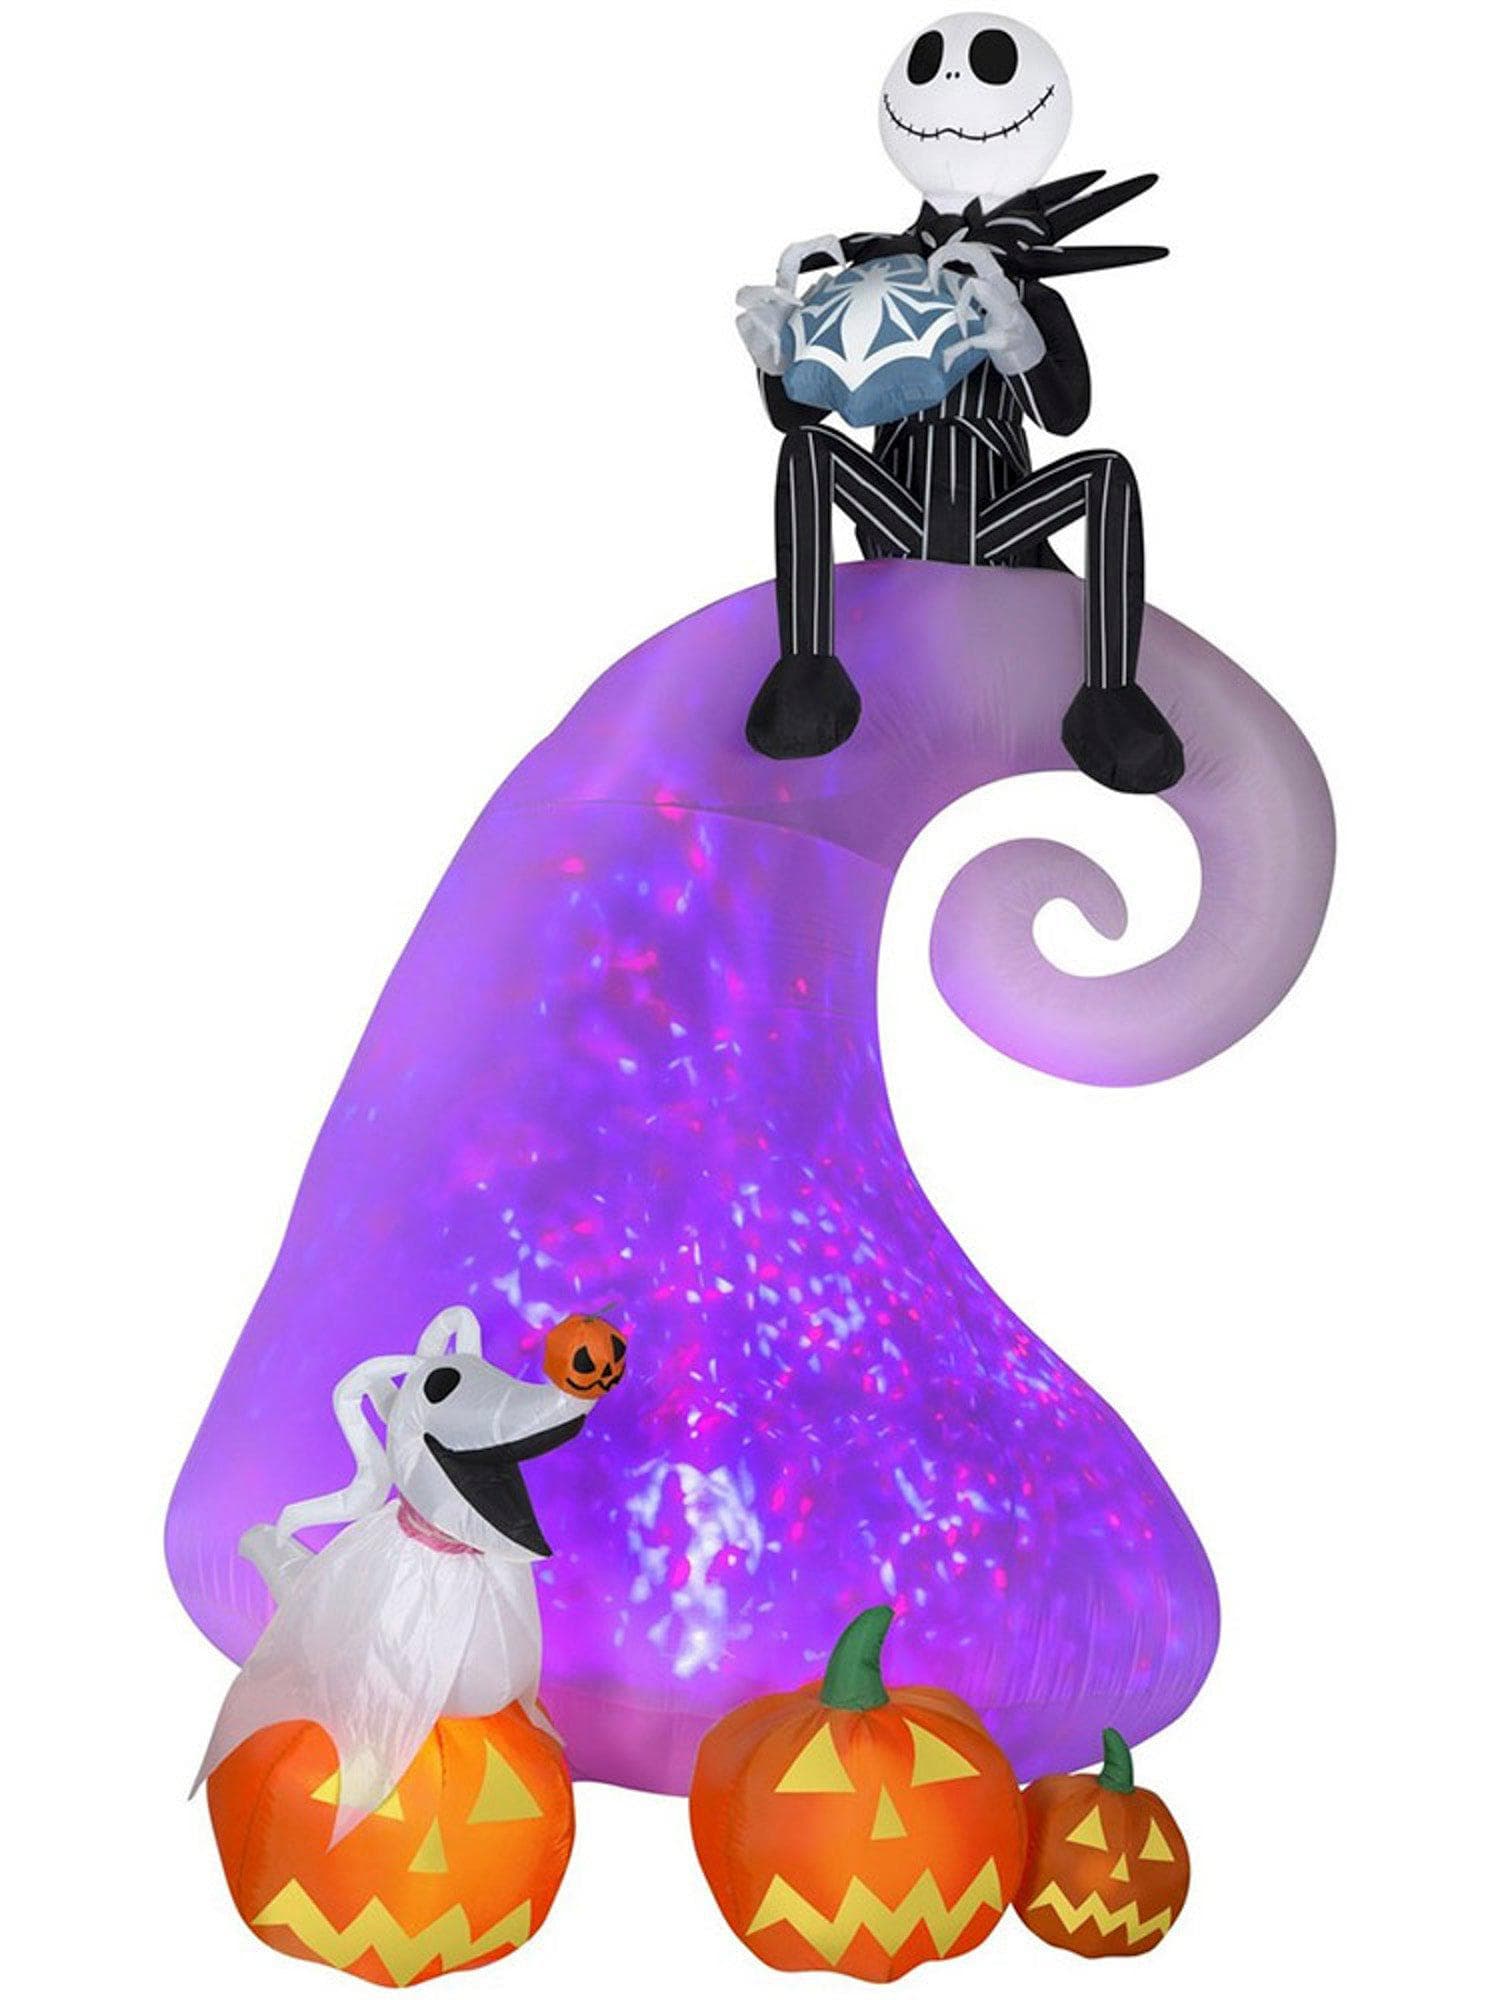 9 Foot The Nightmare Before Christmas Kaleidoscope Projection Light Up Halloween Inflatable Lawn Decor - costumes.com